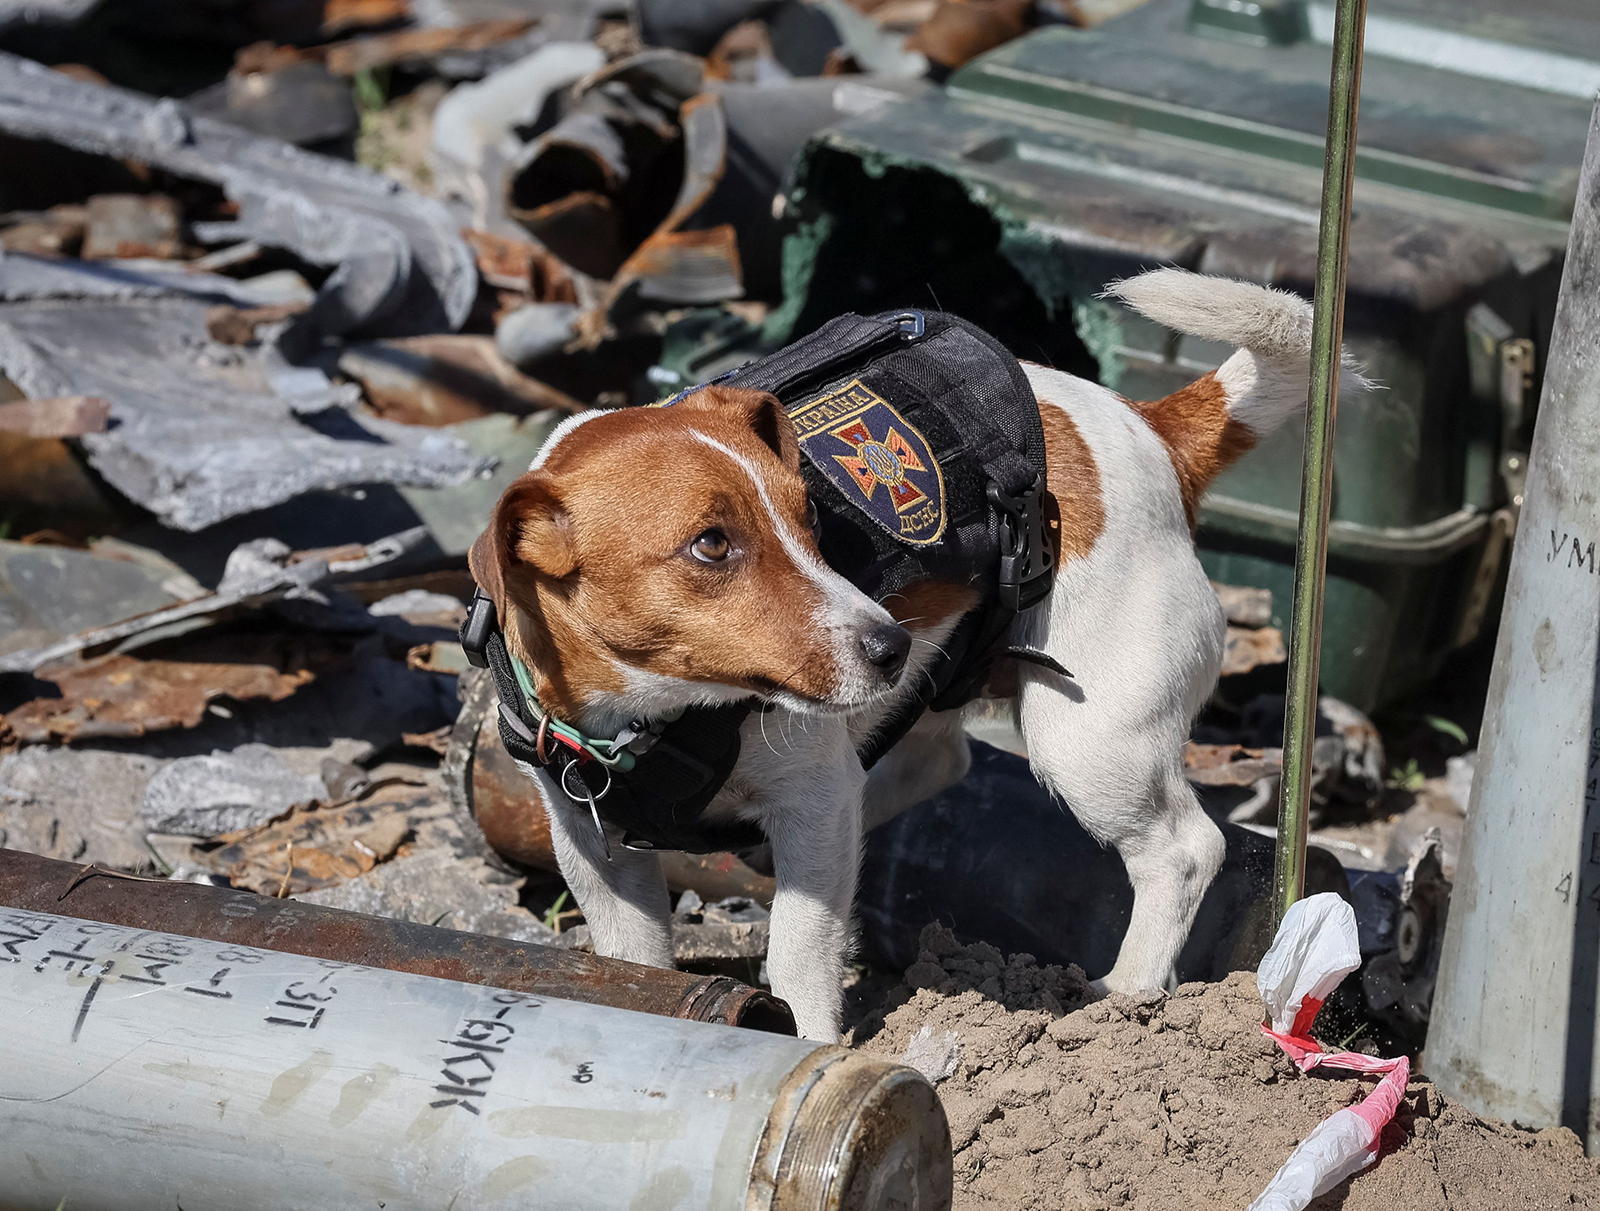 A dog named Patron, trained to search for explosives, is seen at an airfield in the town of Hostomel, on May 5.